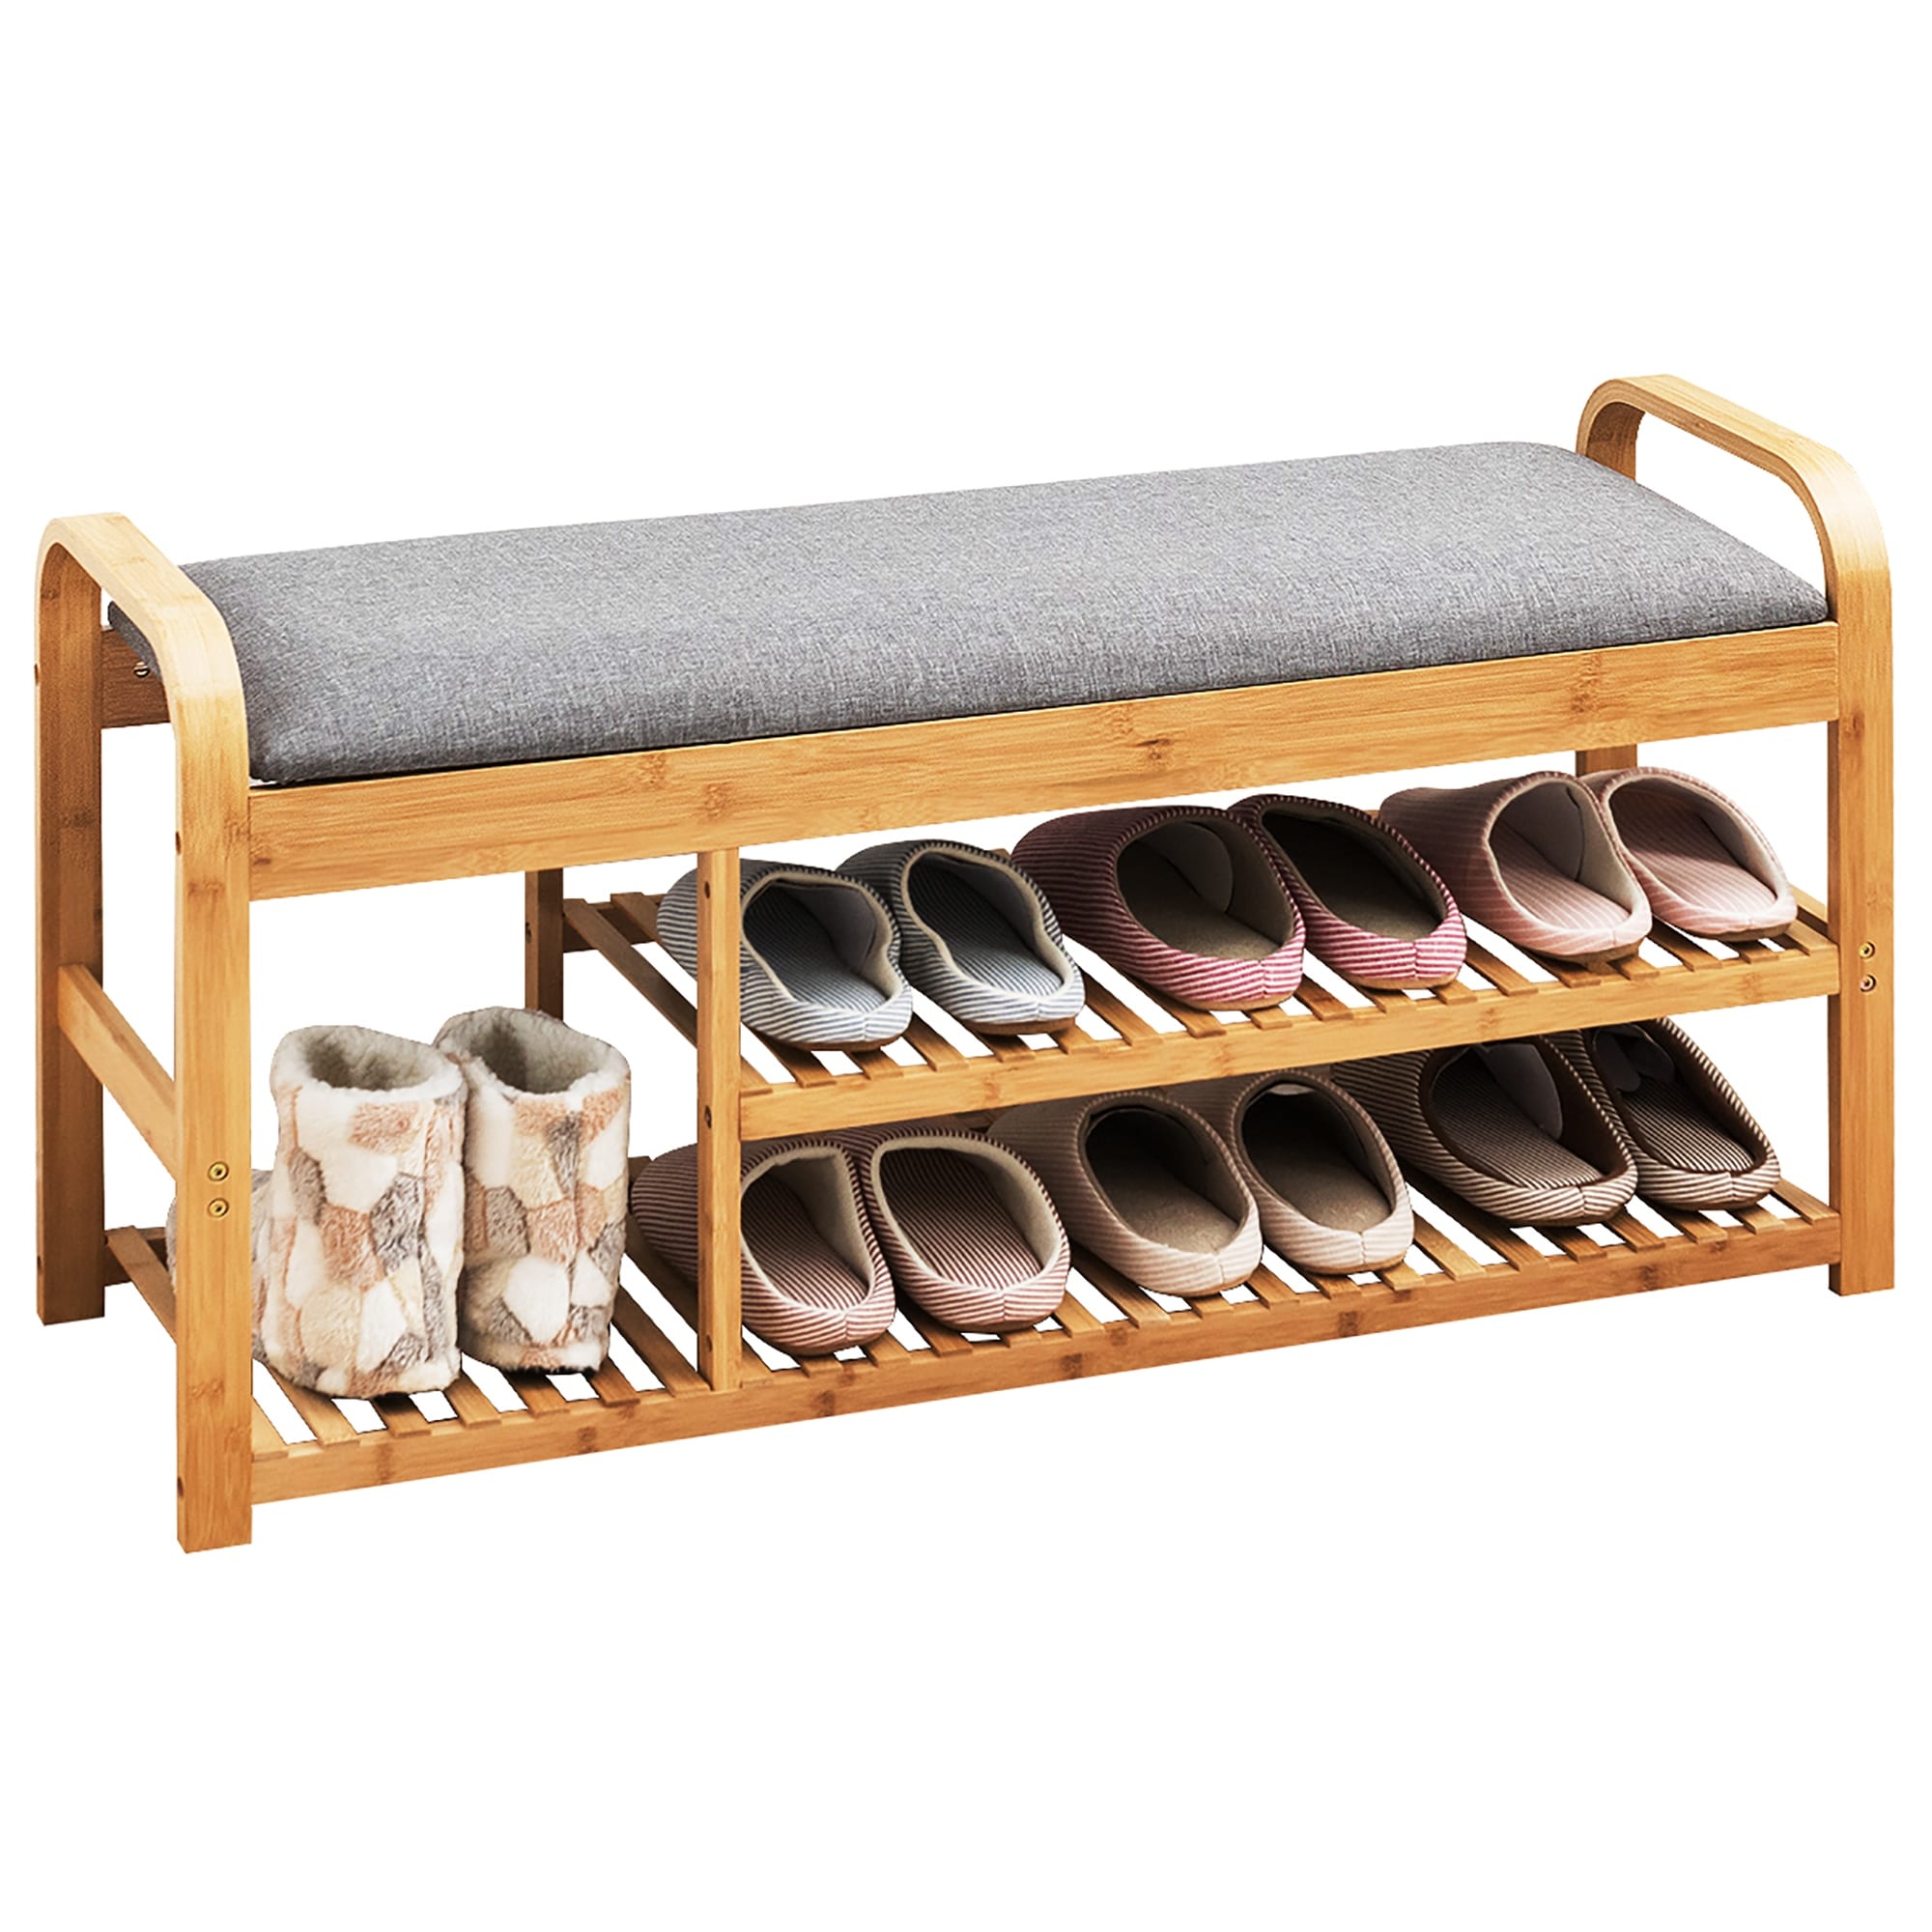 https://ak1.ostkcdn.com/images/products/is/images/direct/d5dad14eeca36f5fe2a26c149cff77ab0da49e5a/Shoe-Rack-Bench-Entryway-3-Tier-Bamboo-Shoe-Organizer-with-Cushion.jpg